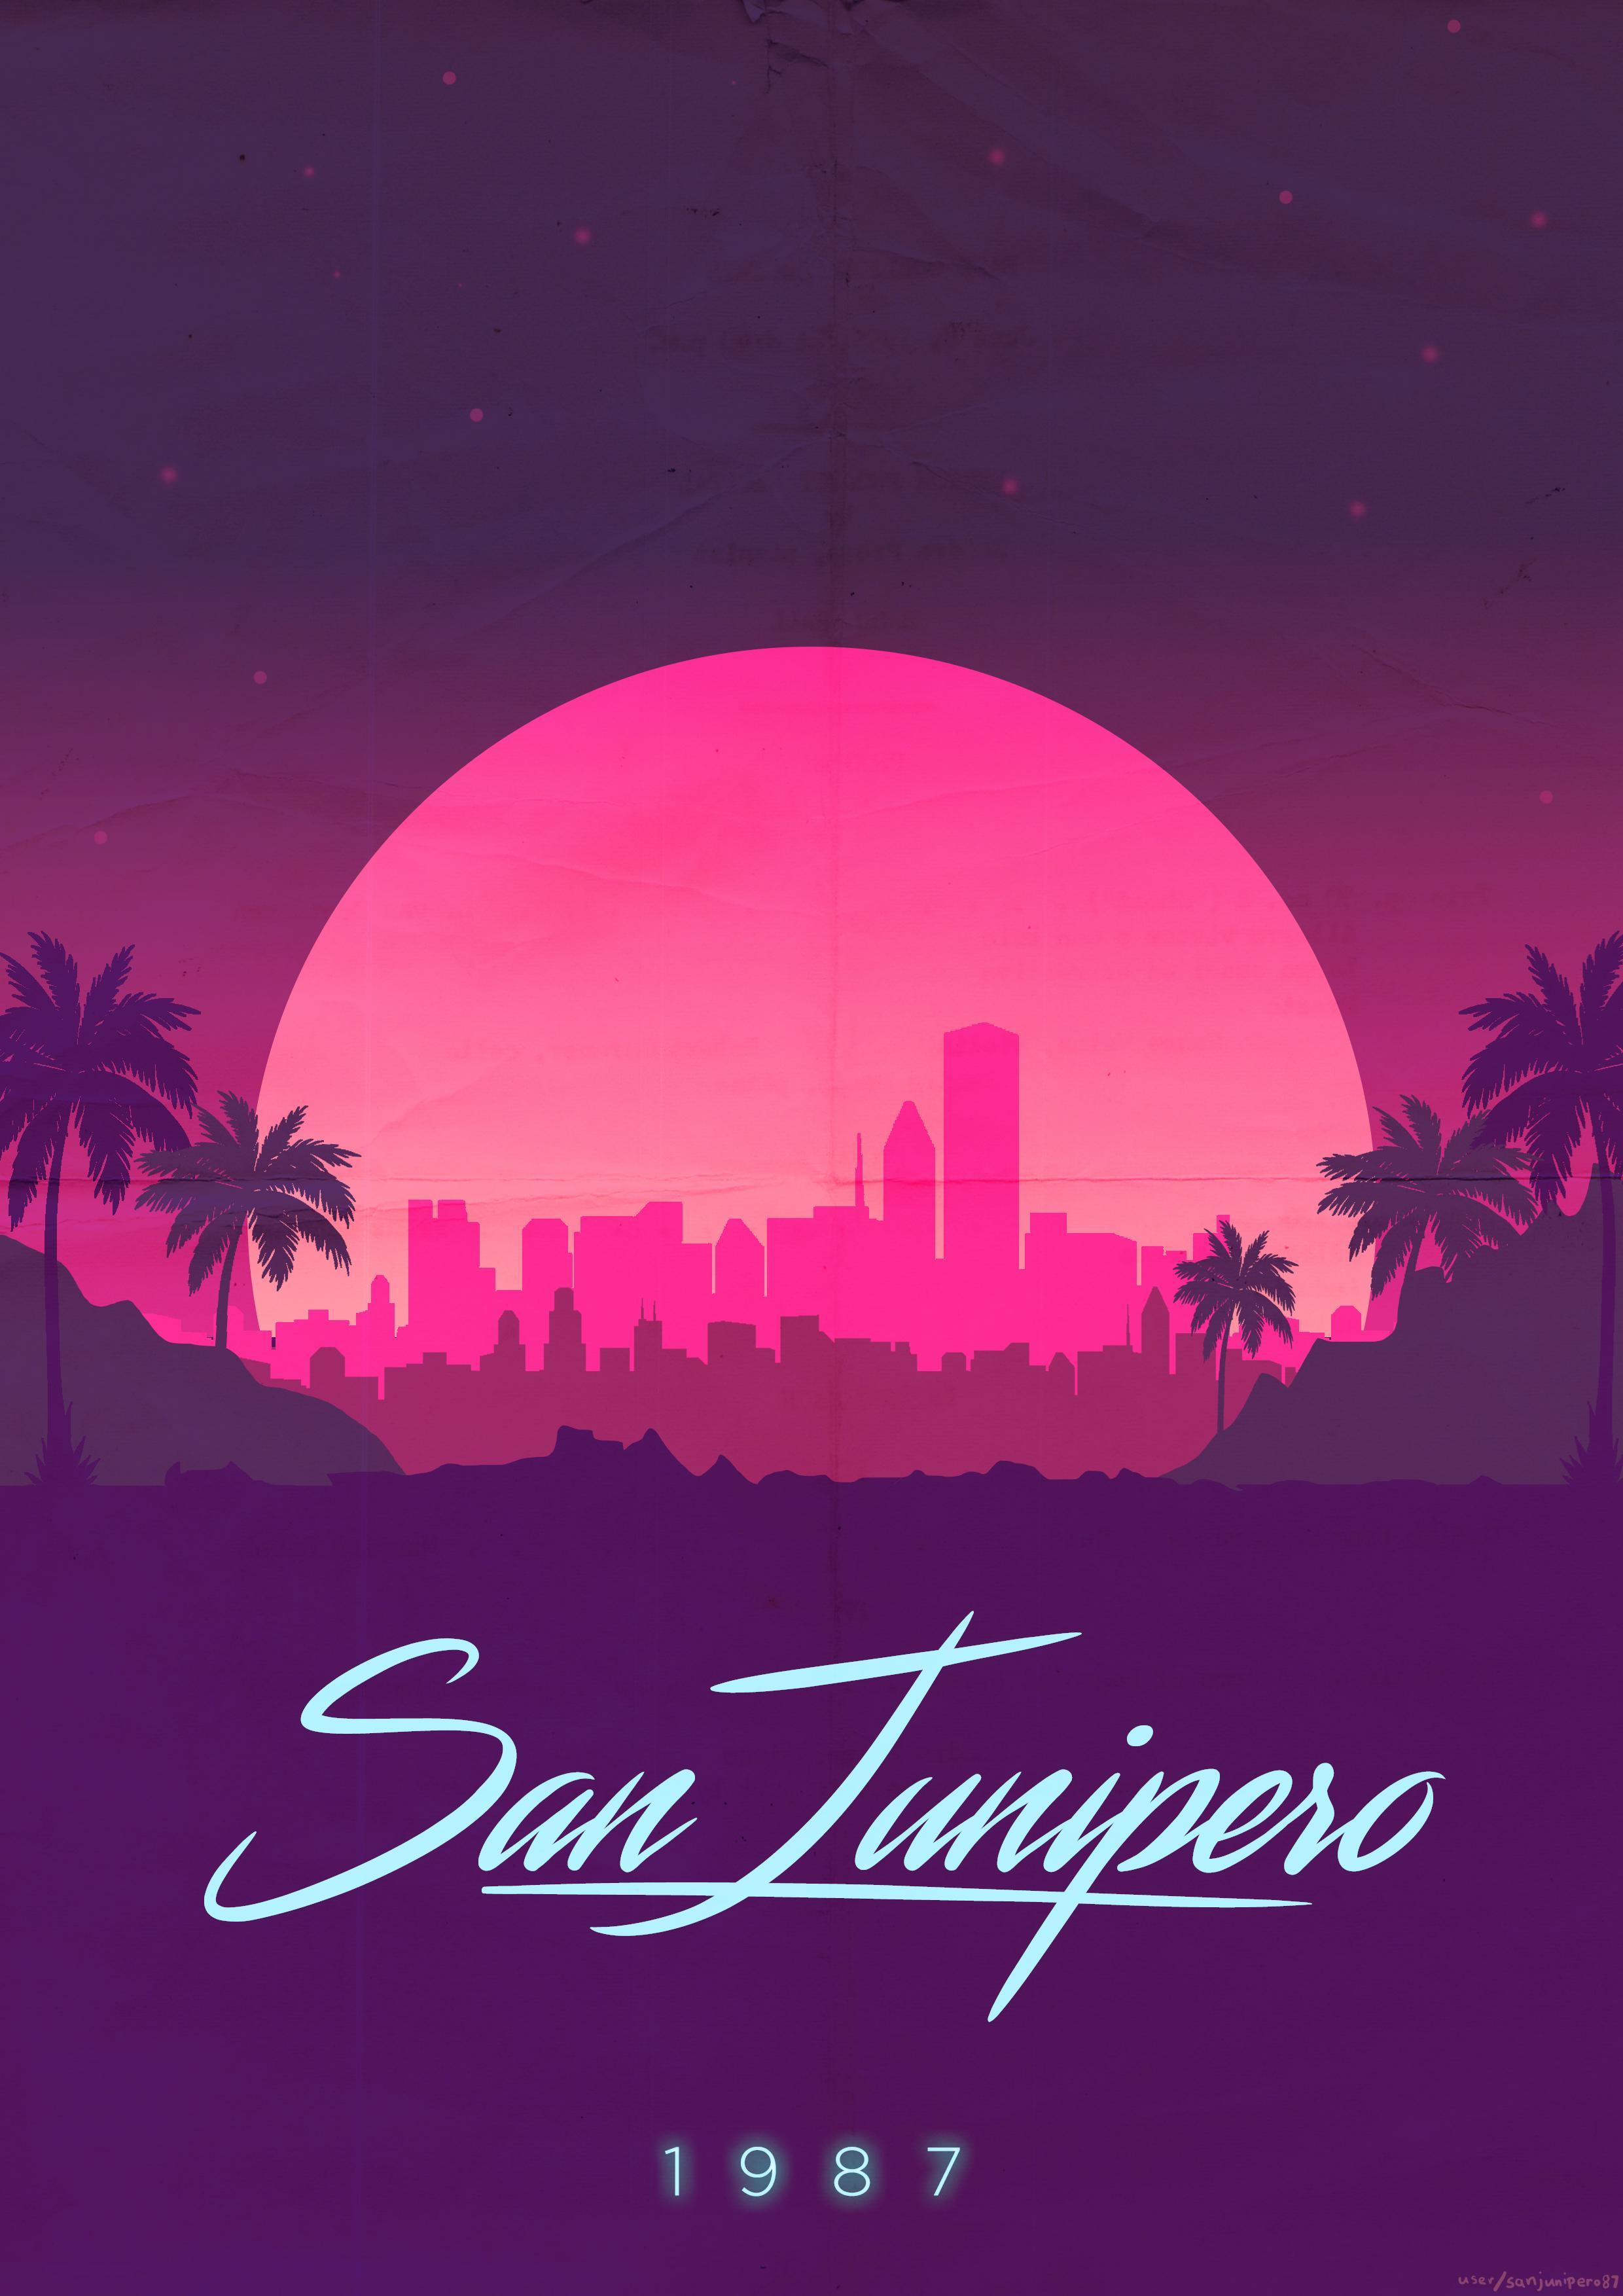 Posters I made for 'San Junipero'